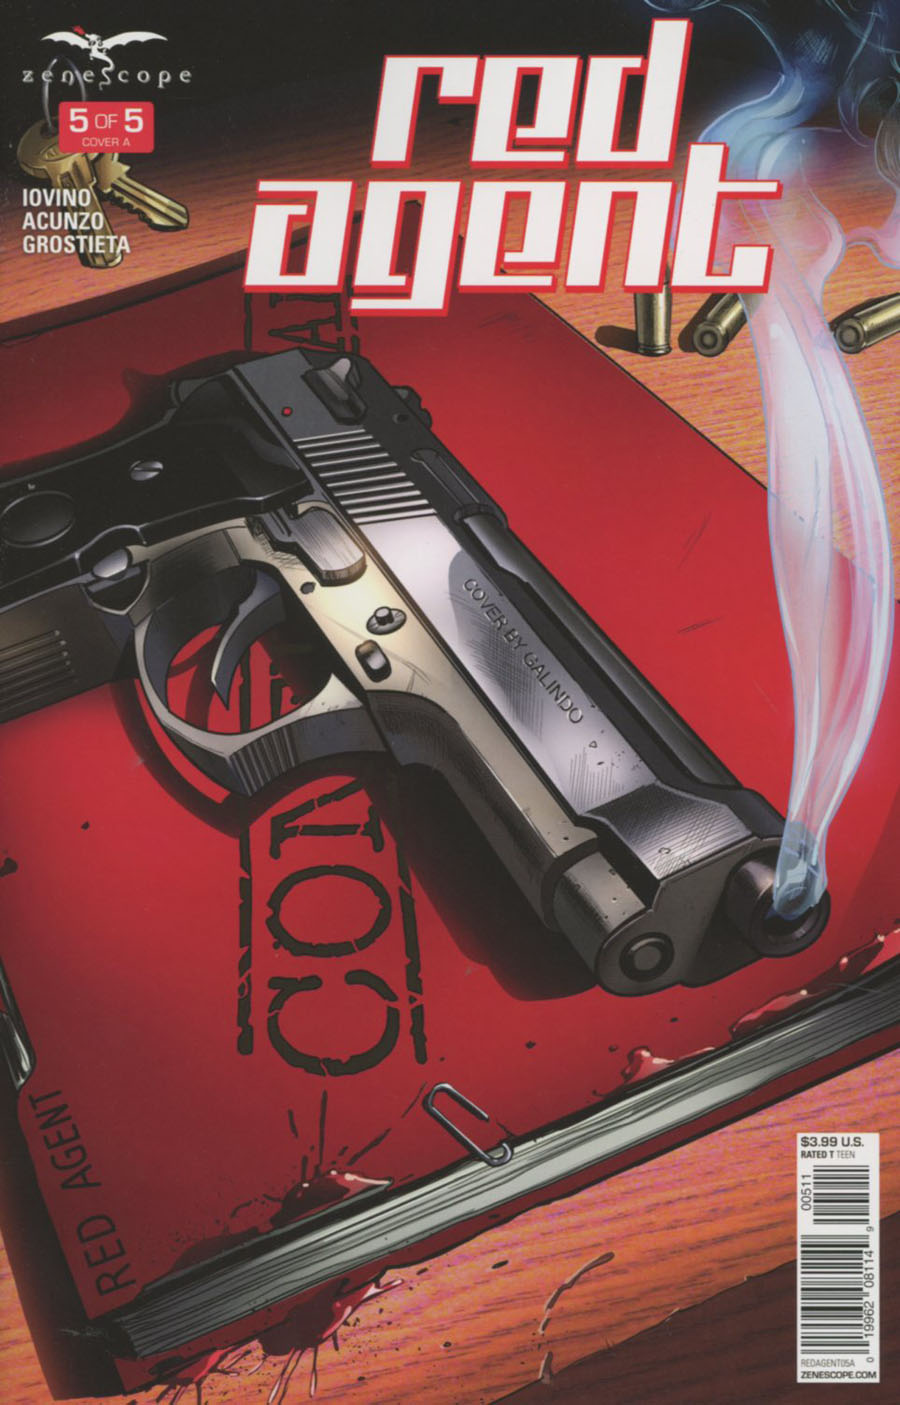 Grimm Fairy Tales Presents Red Agent #5 Cover A Diego Galindo